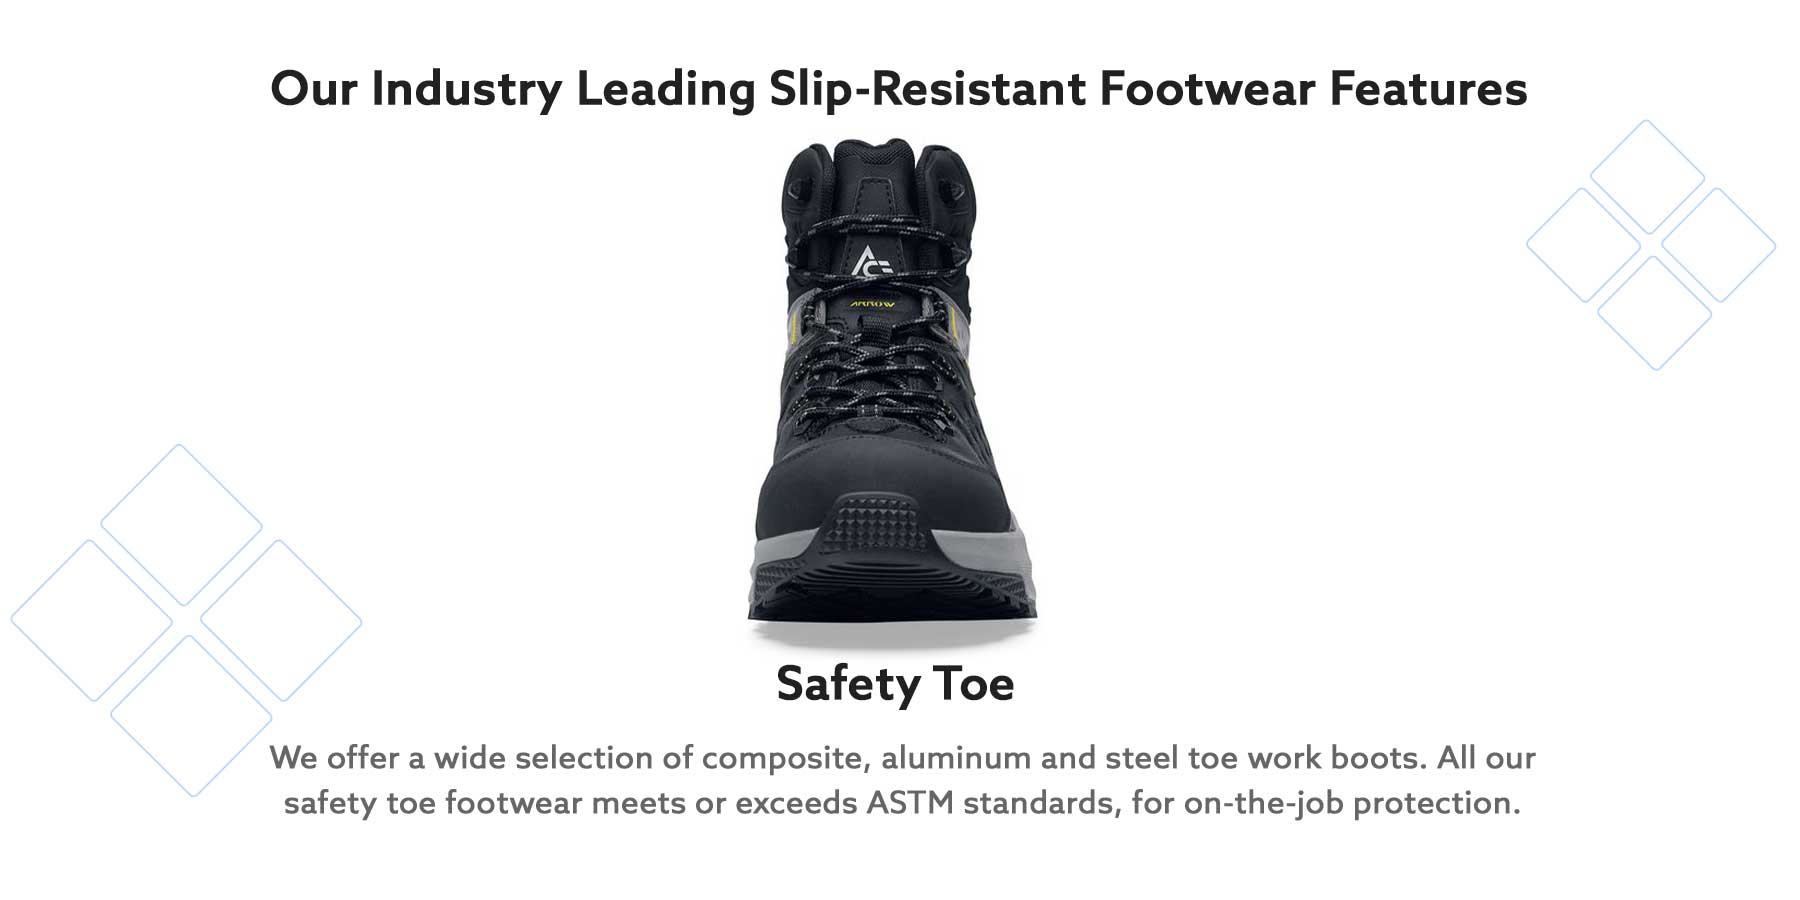 Safety toe technology exclusively from Shoes For Crews